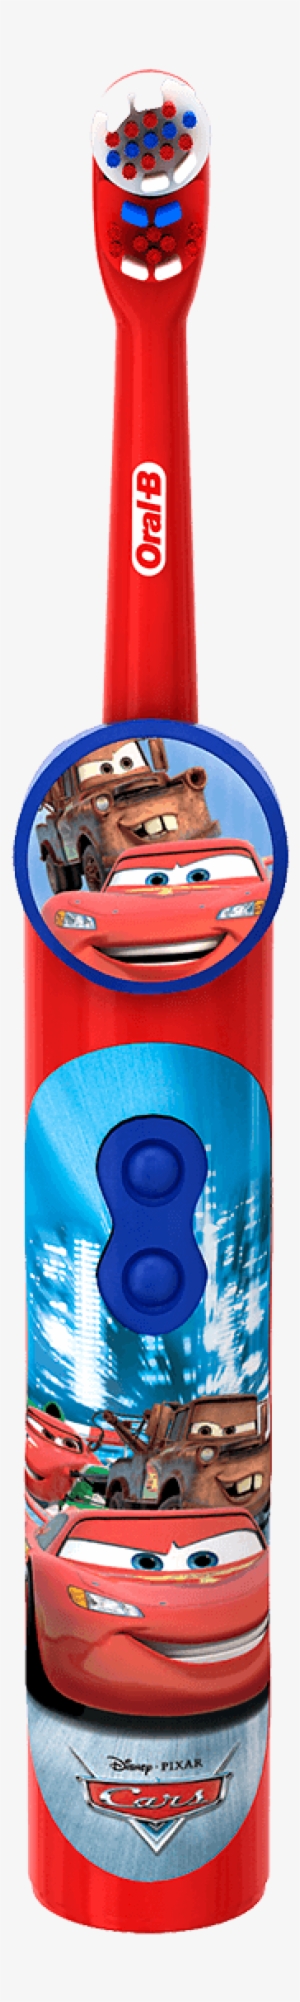 Oral B Pro Health Stages Disney Cars Battery Toothbrush - Disney Cars Oral B Toothbrush